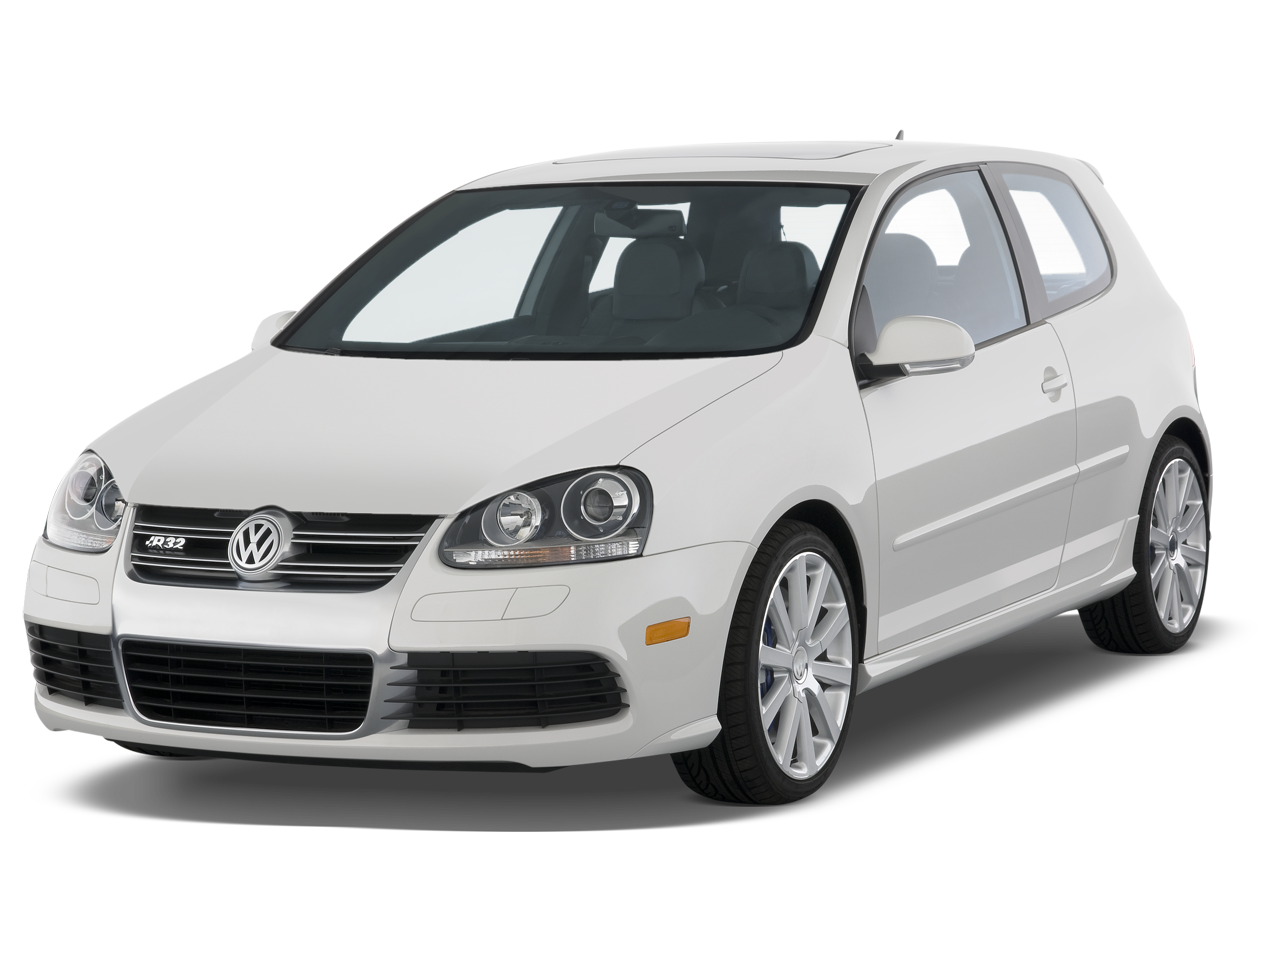 2008 Volkswagen R32 Prices, Reviews, and Photos - MotorTrend